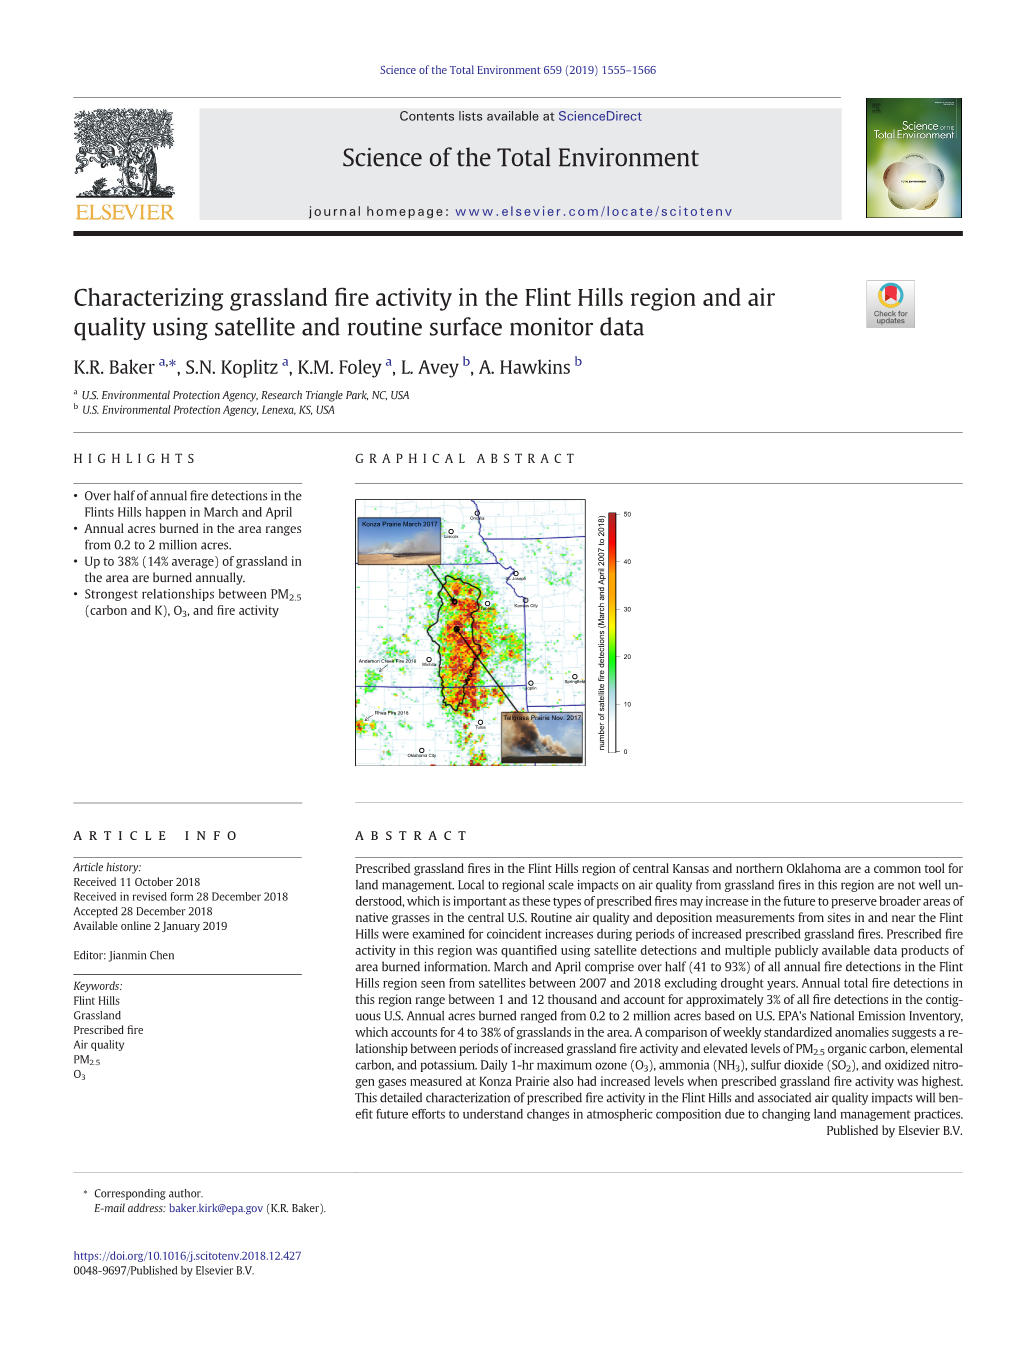 Characterizing Grassland Fire Activity in the Flint Hills Region and Air